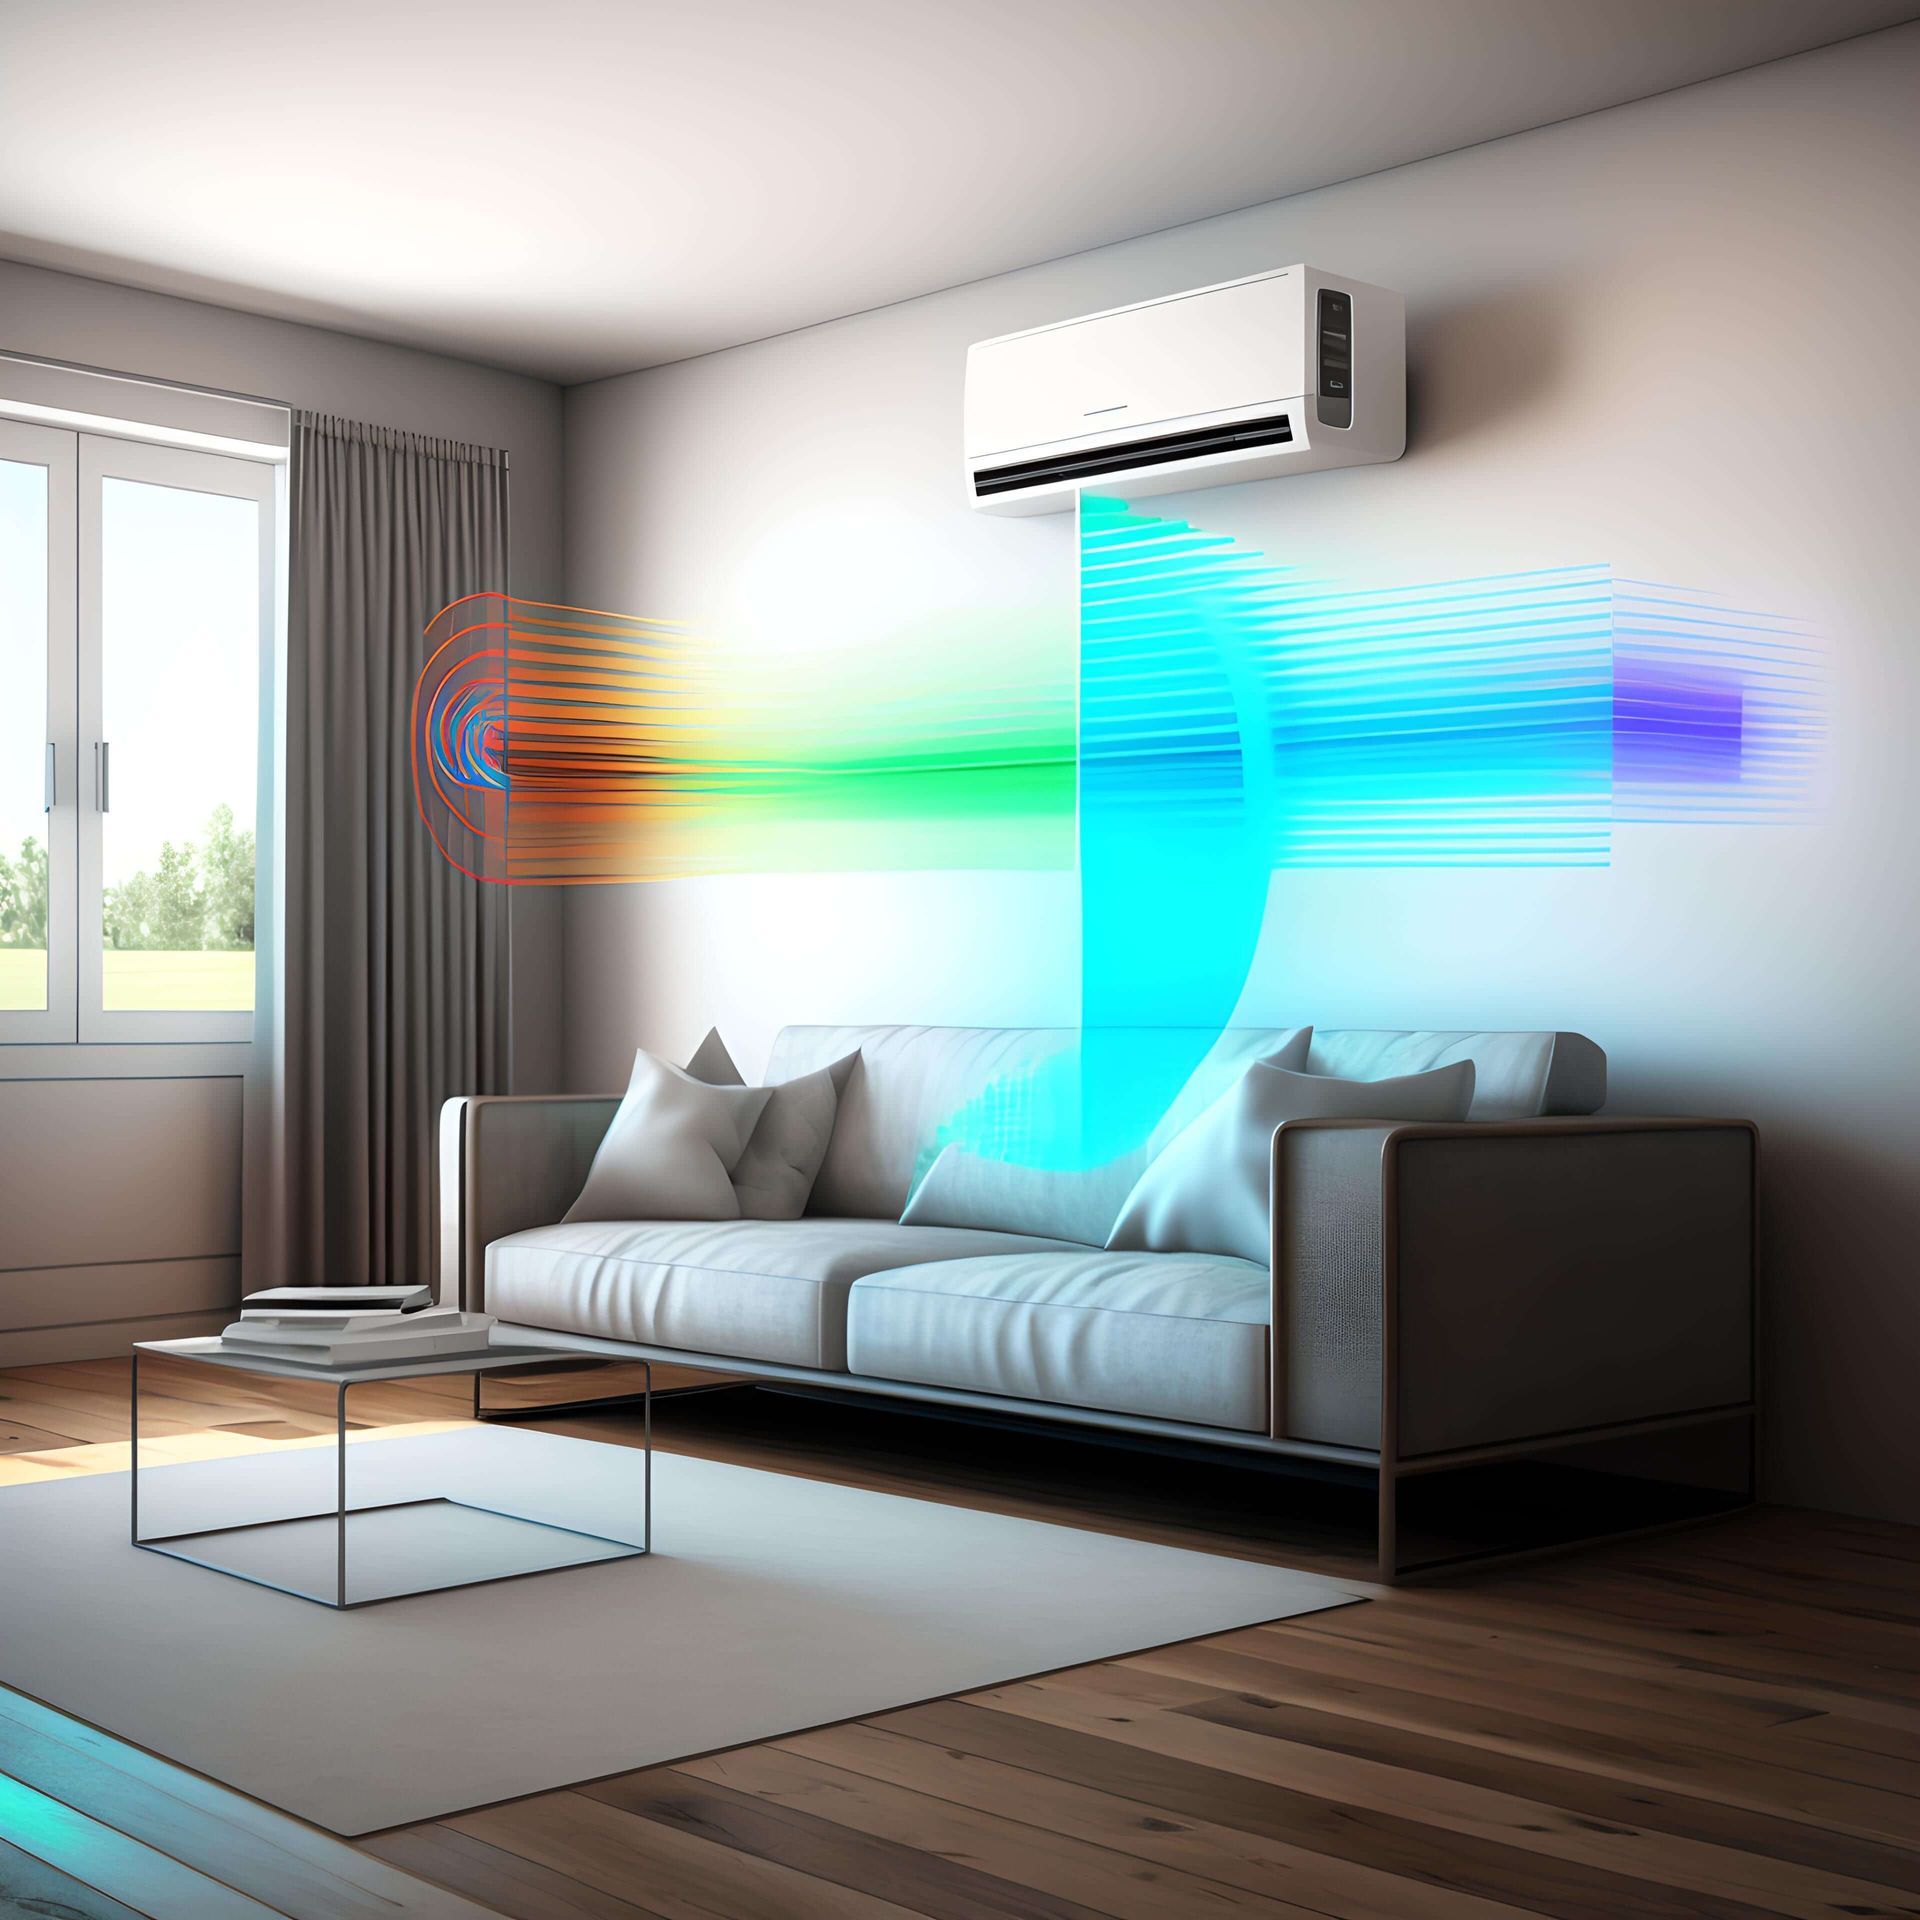 Modern split air conditioning unit in stylish living room.